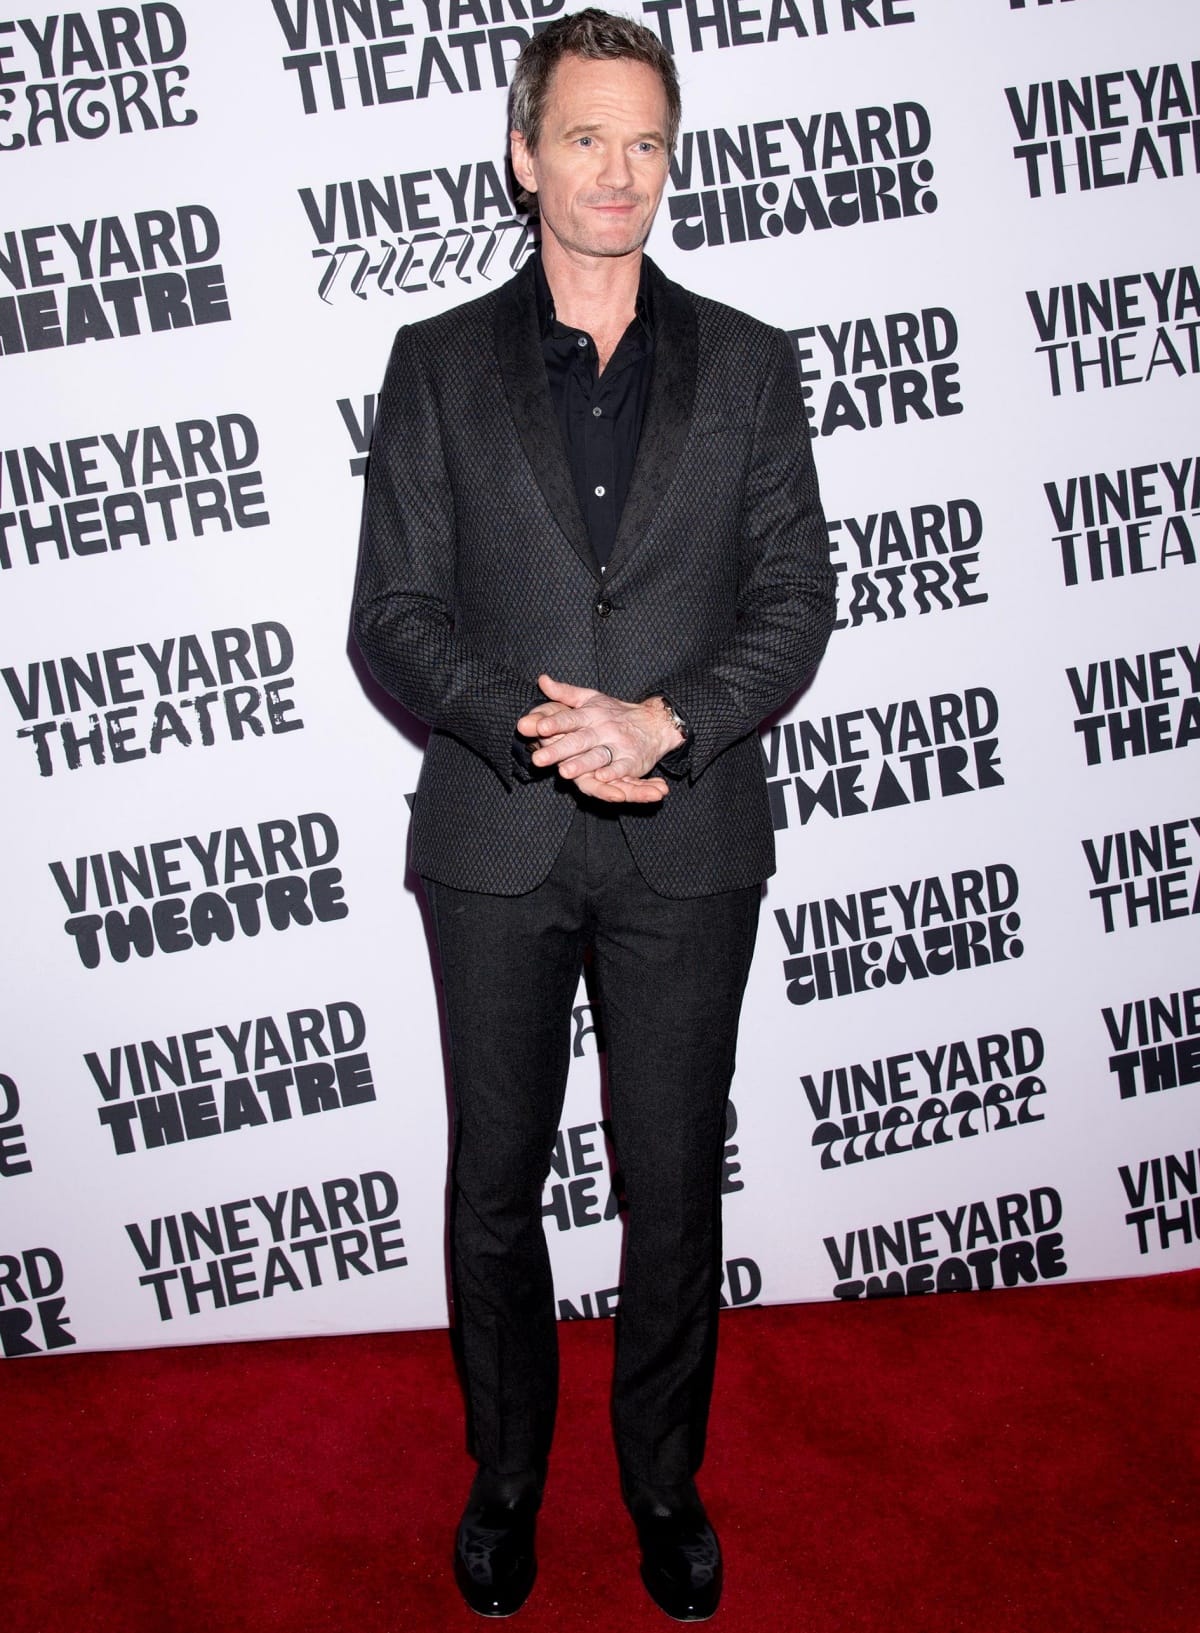 Neil Patrick Harris making an appearance at the Vineyard Theatre 40th Anniversary Gala